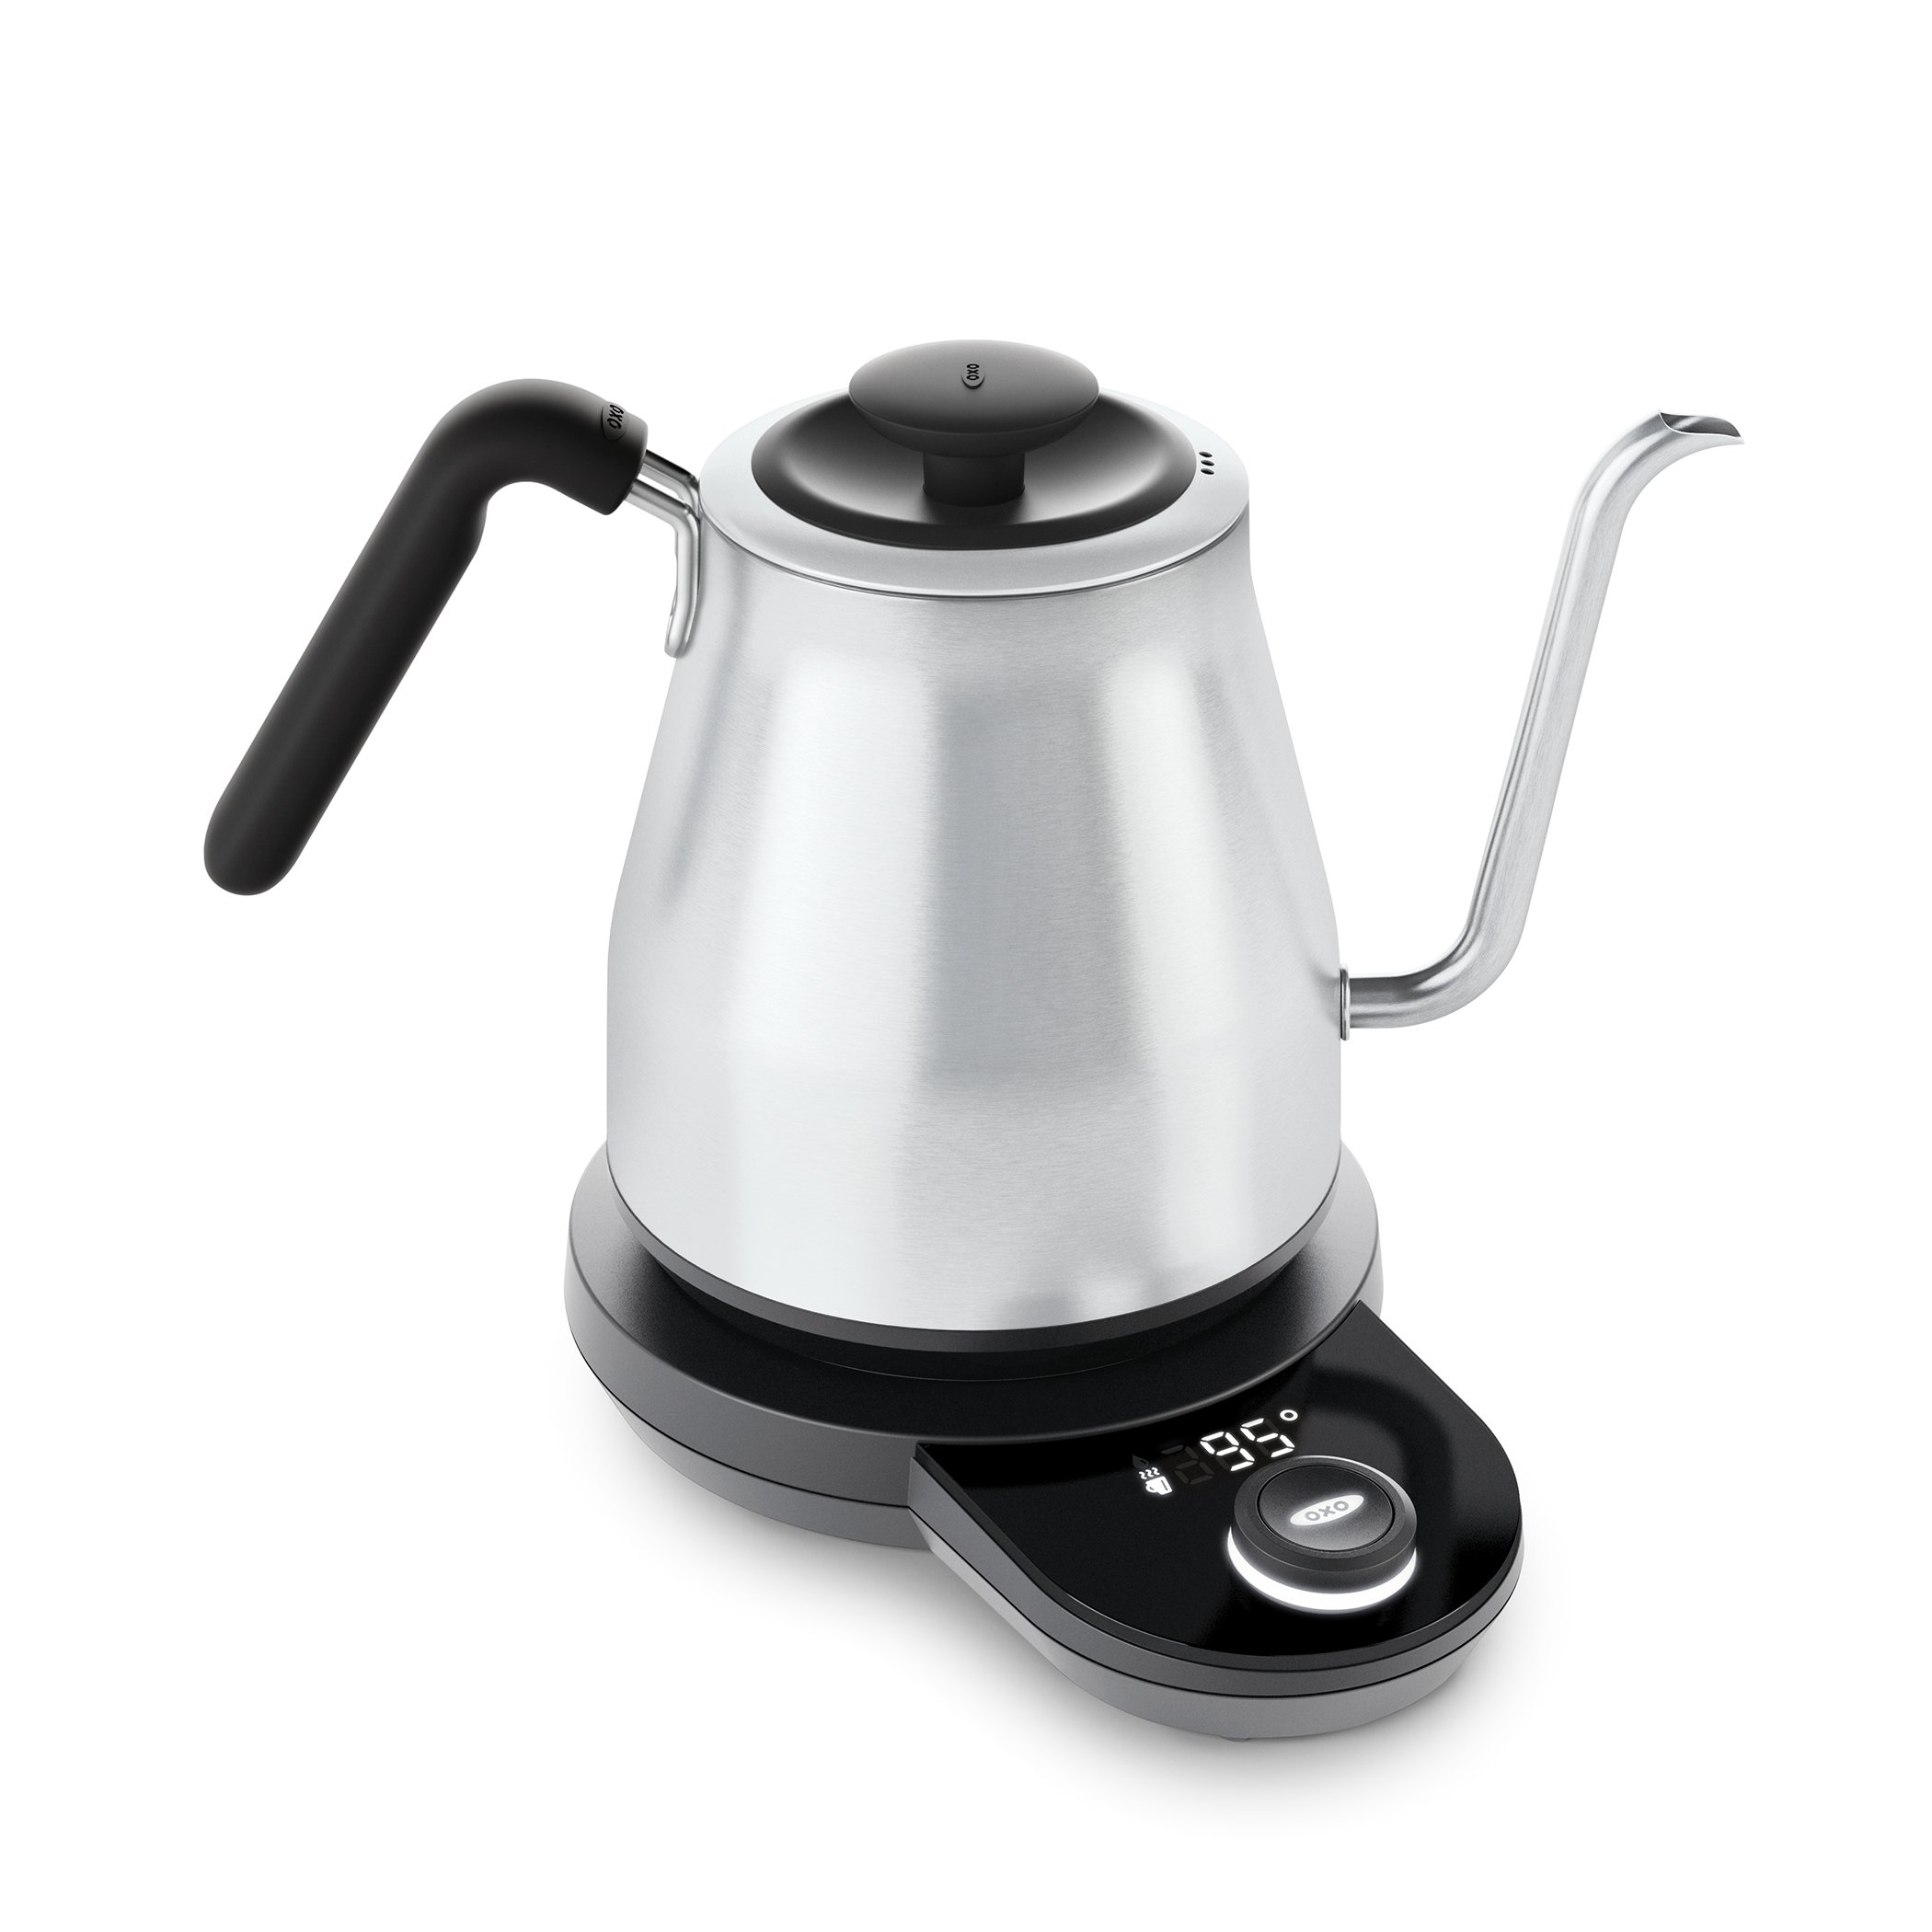 OXO Brew Gooseneck Electric Kettle – Hot Water Kettle, Pour Over Coffee & Tea Kettle, Adjustable Temperature, Built-In Brew Timer, Stainless Steel, 1L?